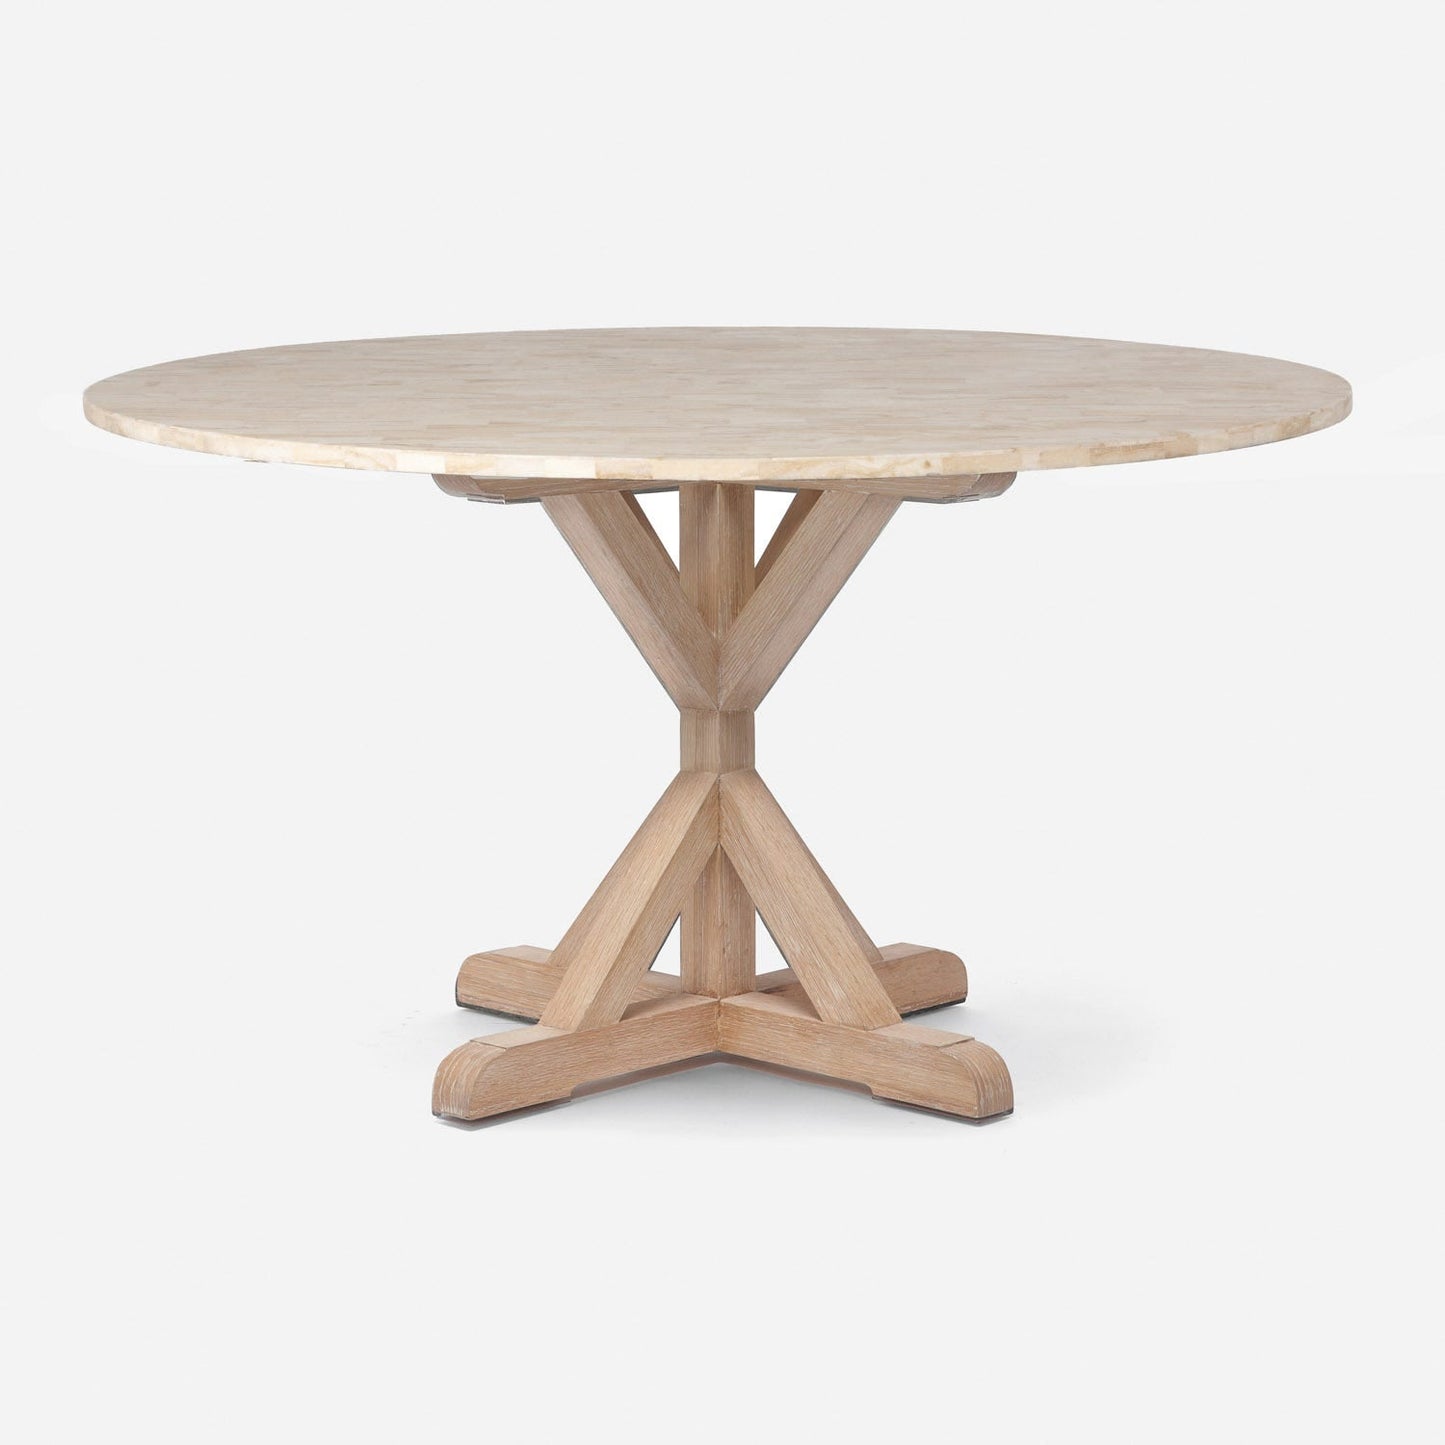 Made Goods Dane 54" x 30" White Cerused Oak Dinning Table With Round Beige Crystal Stone Table Top